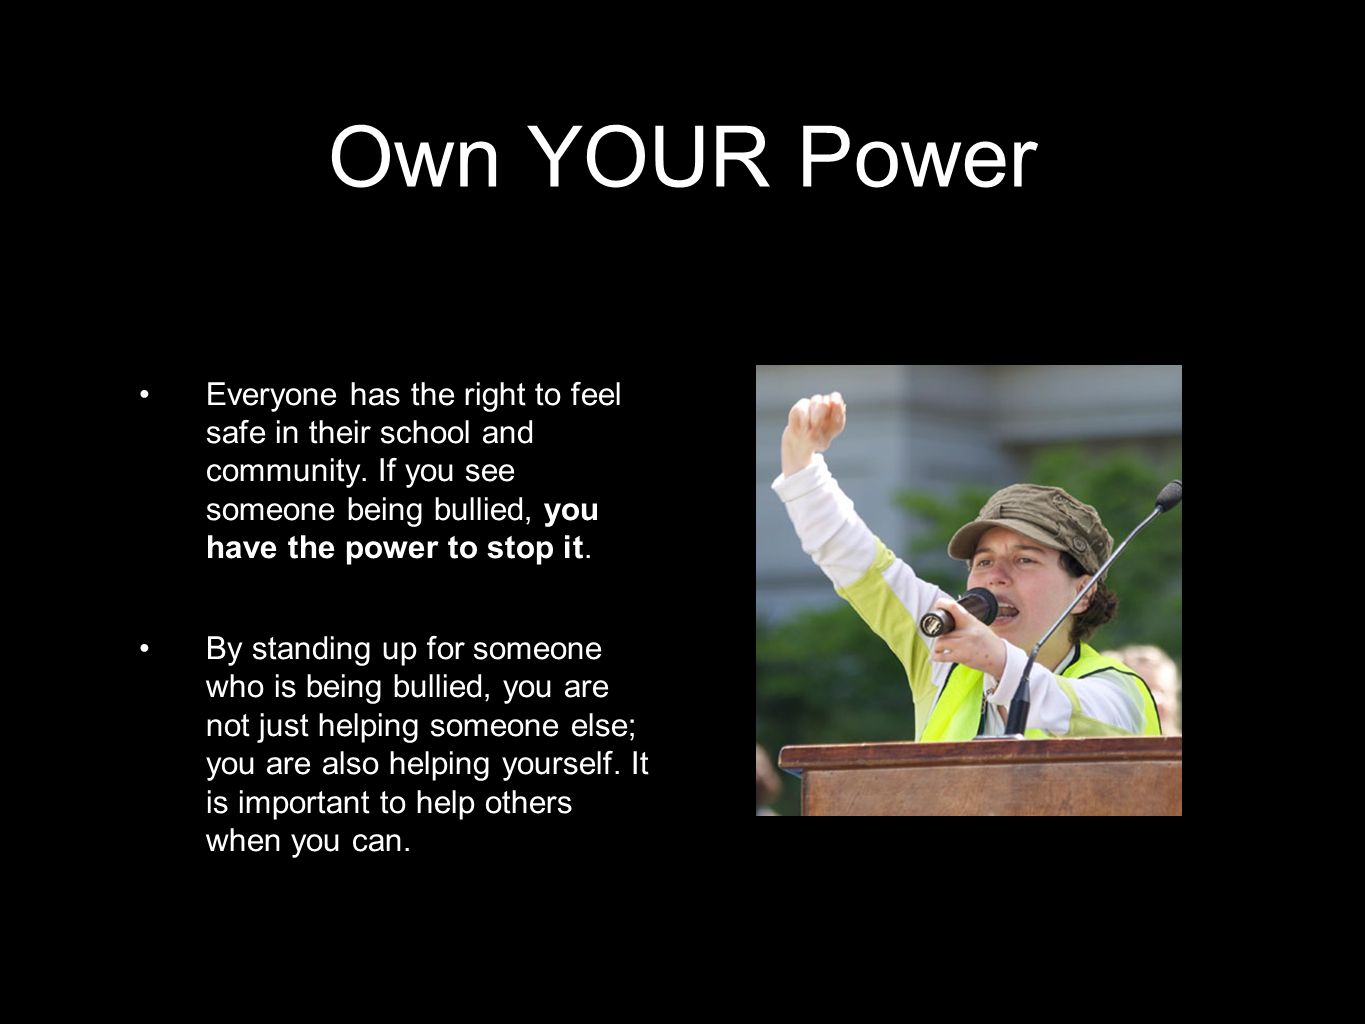 Own YOUR Power